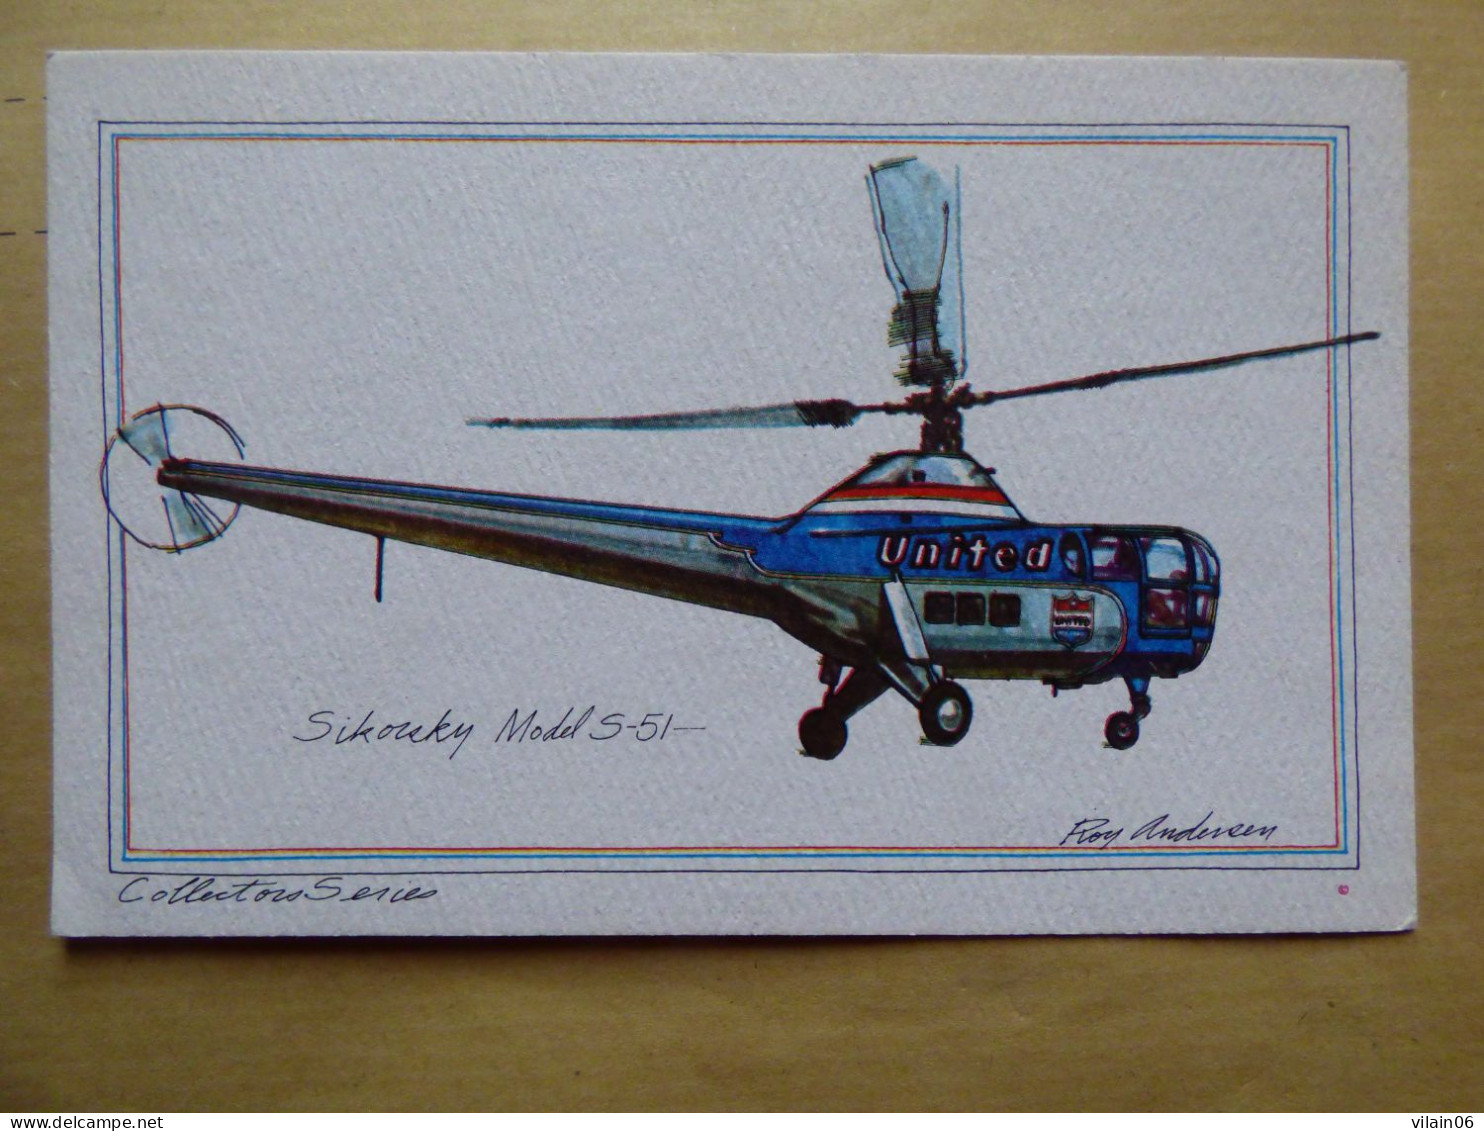 UNITED  SIKORSKY S-51  AIRLINES ISSUE / CARTE DE COMPAGNIE - Hélicoptères